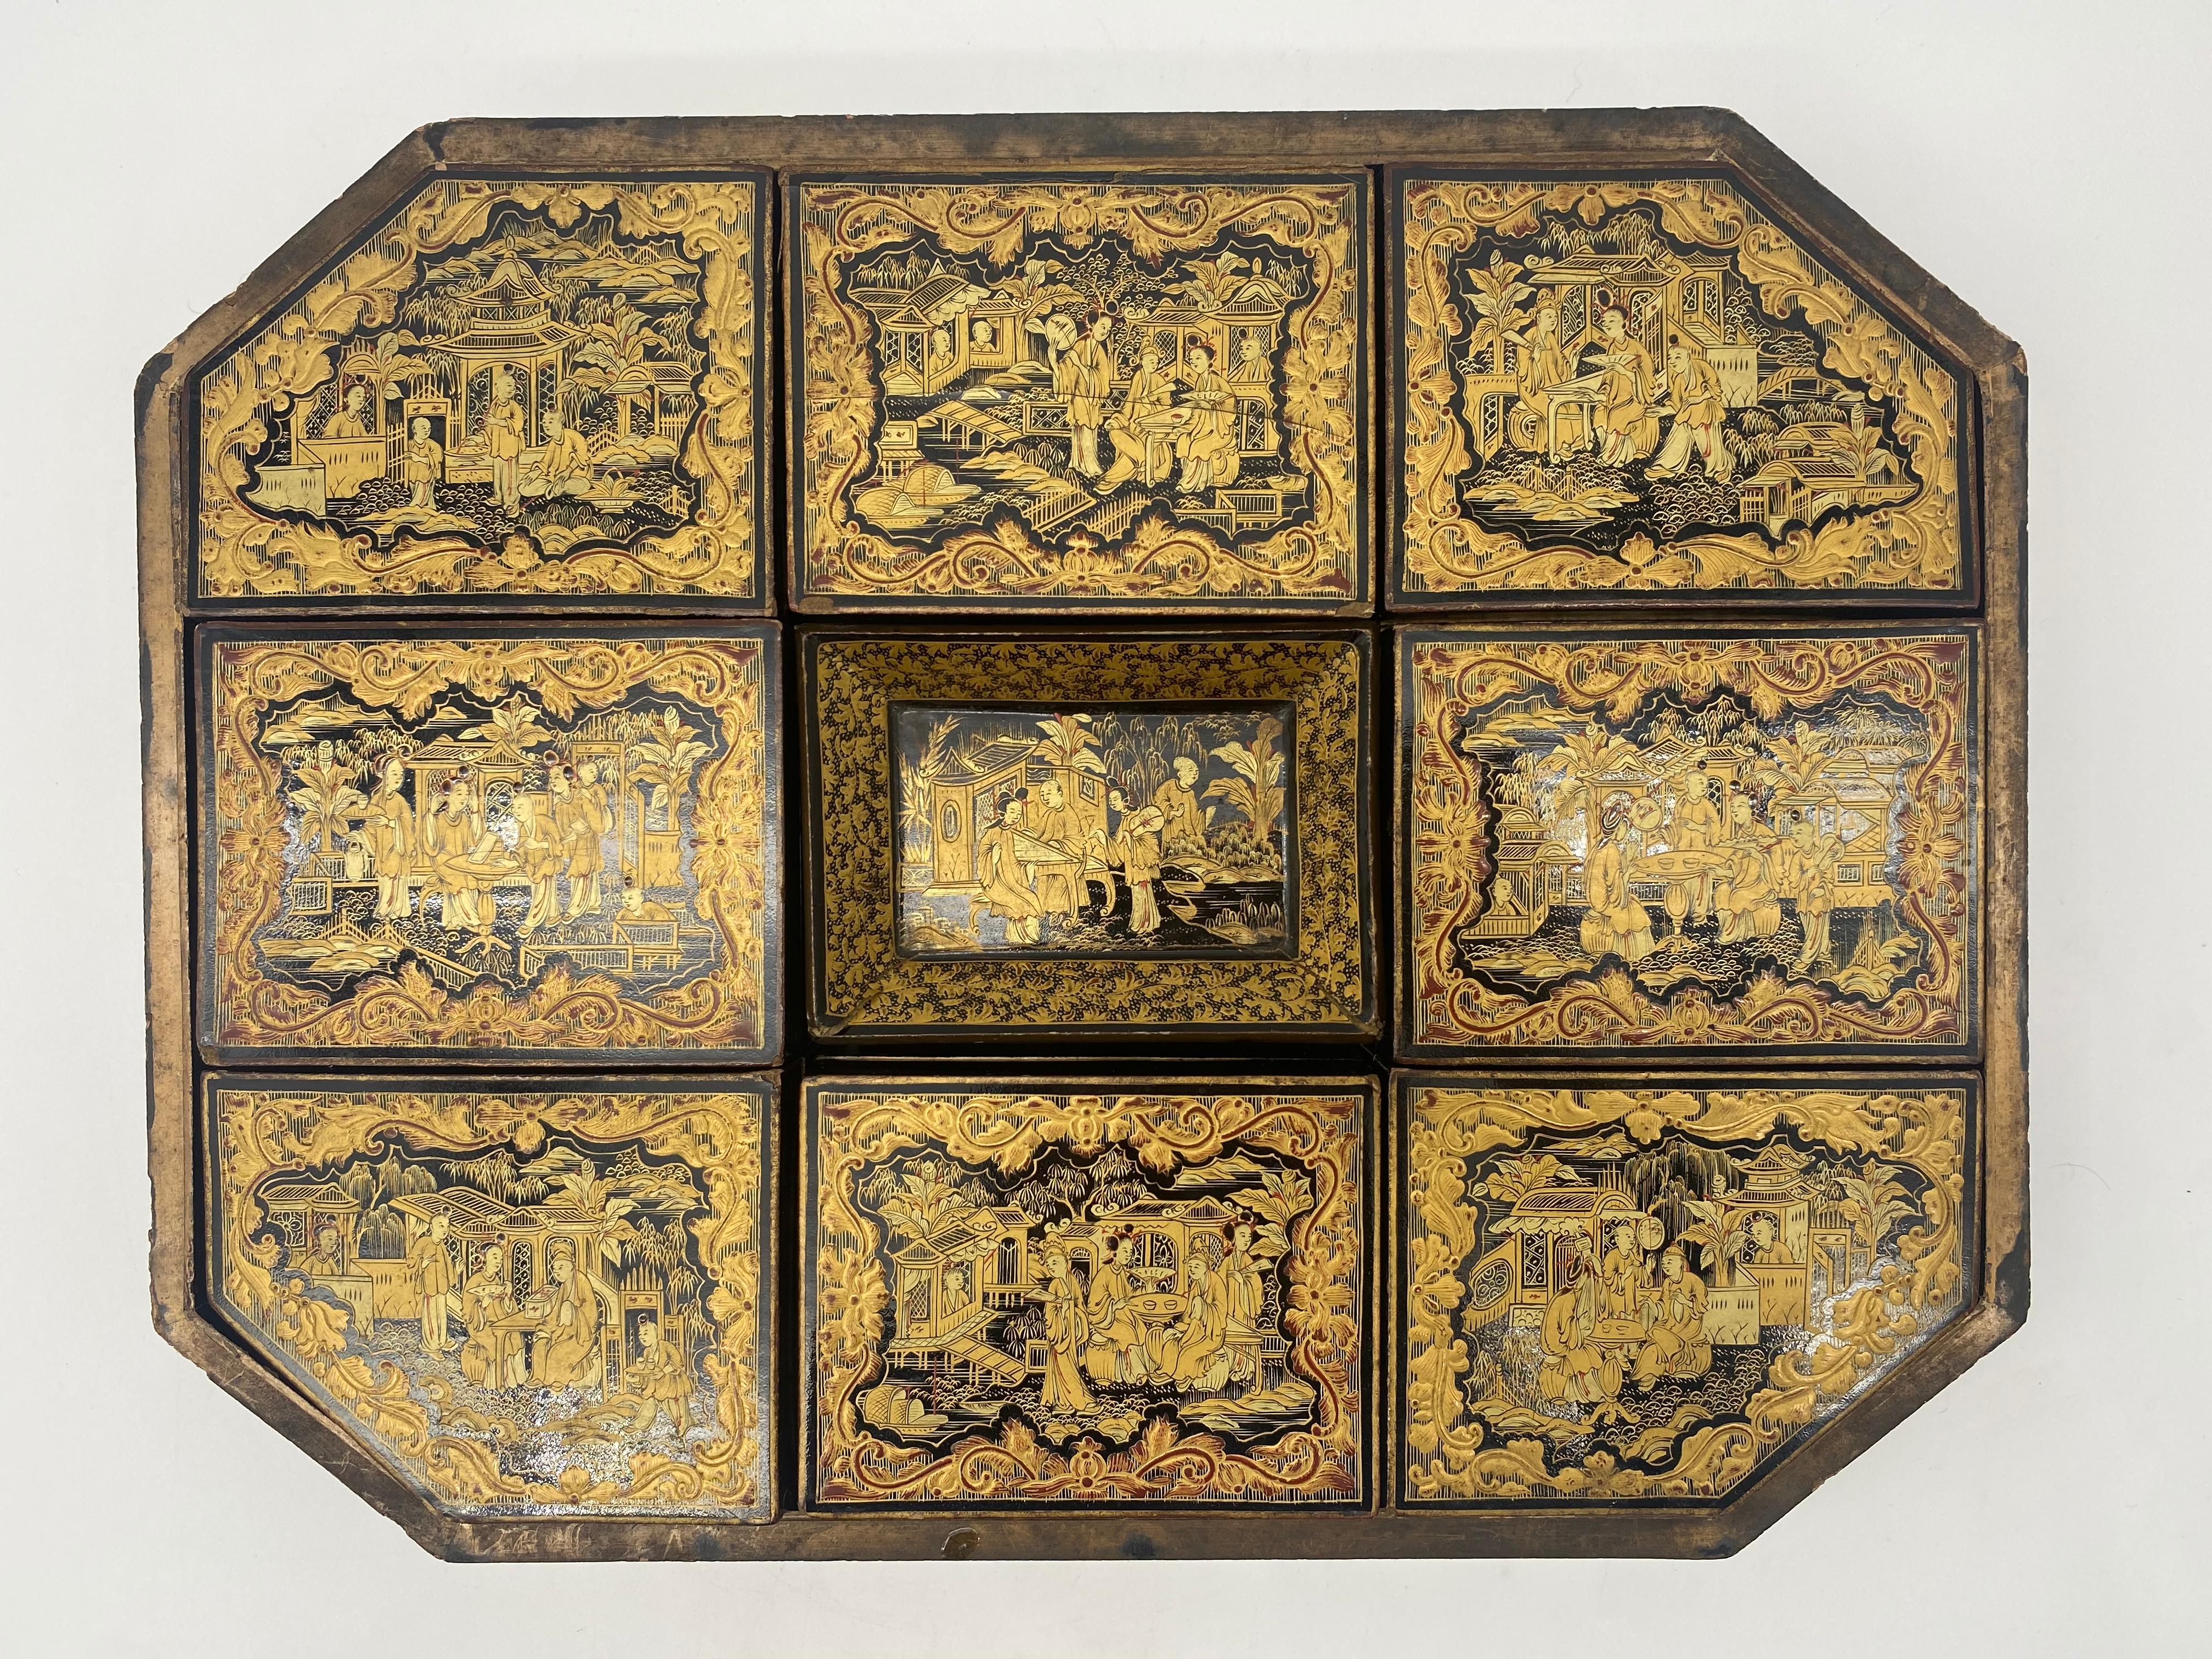 Qing Antique 19th Century Export Chinese Gilt Chinoiserie Lacquer Gaming Box For Sale